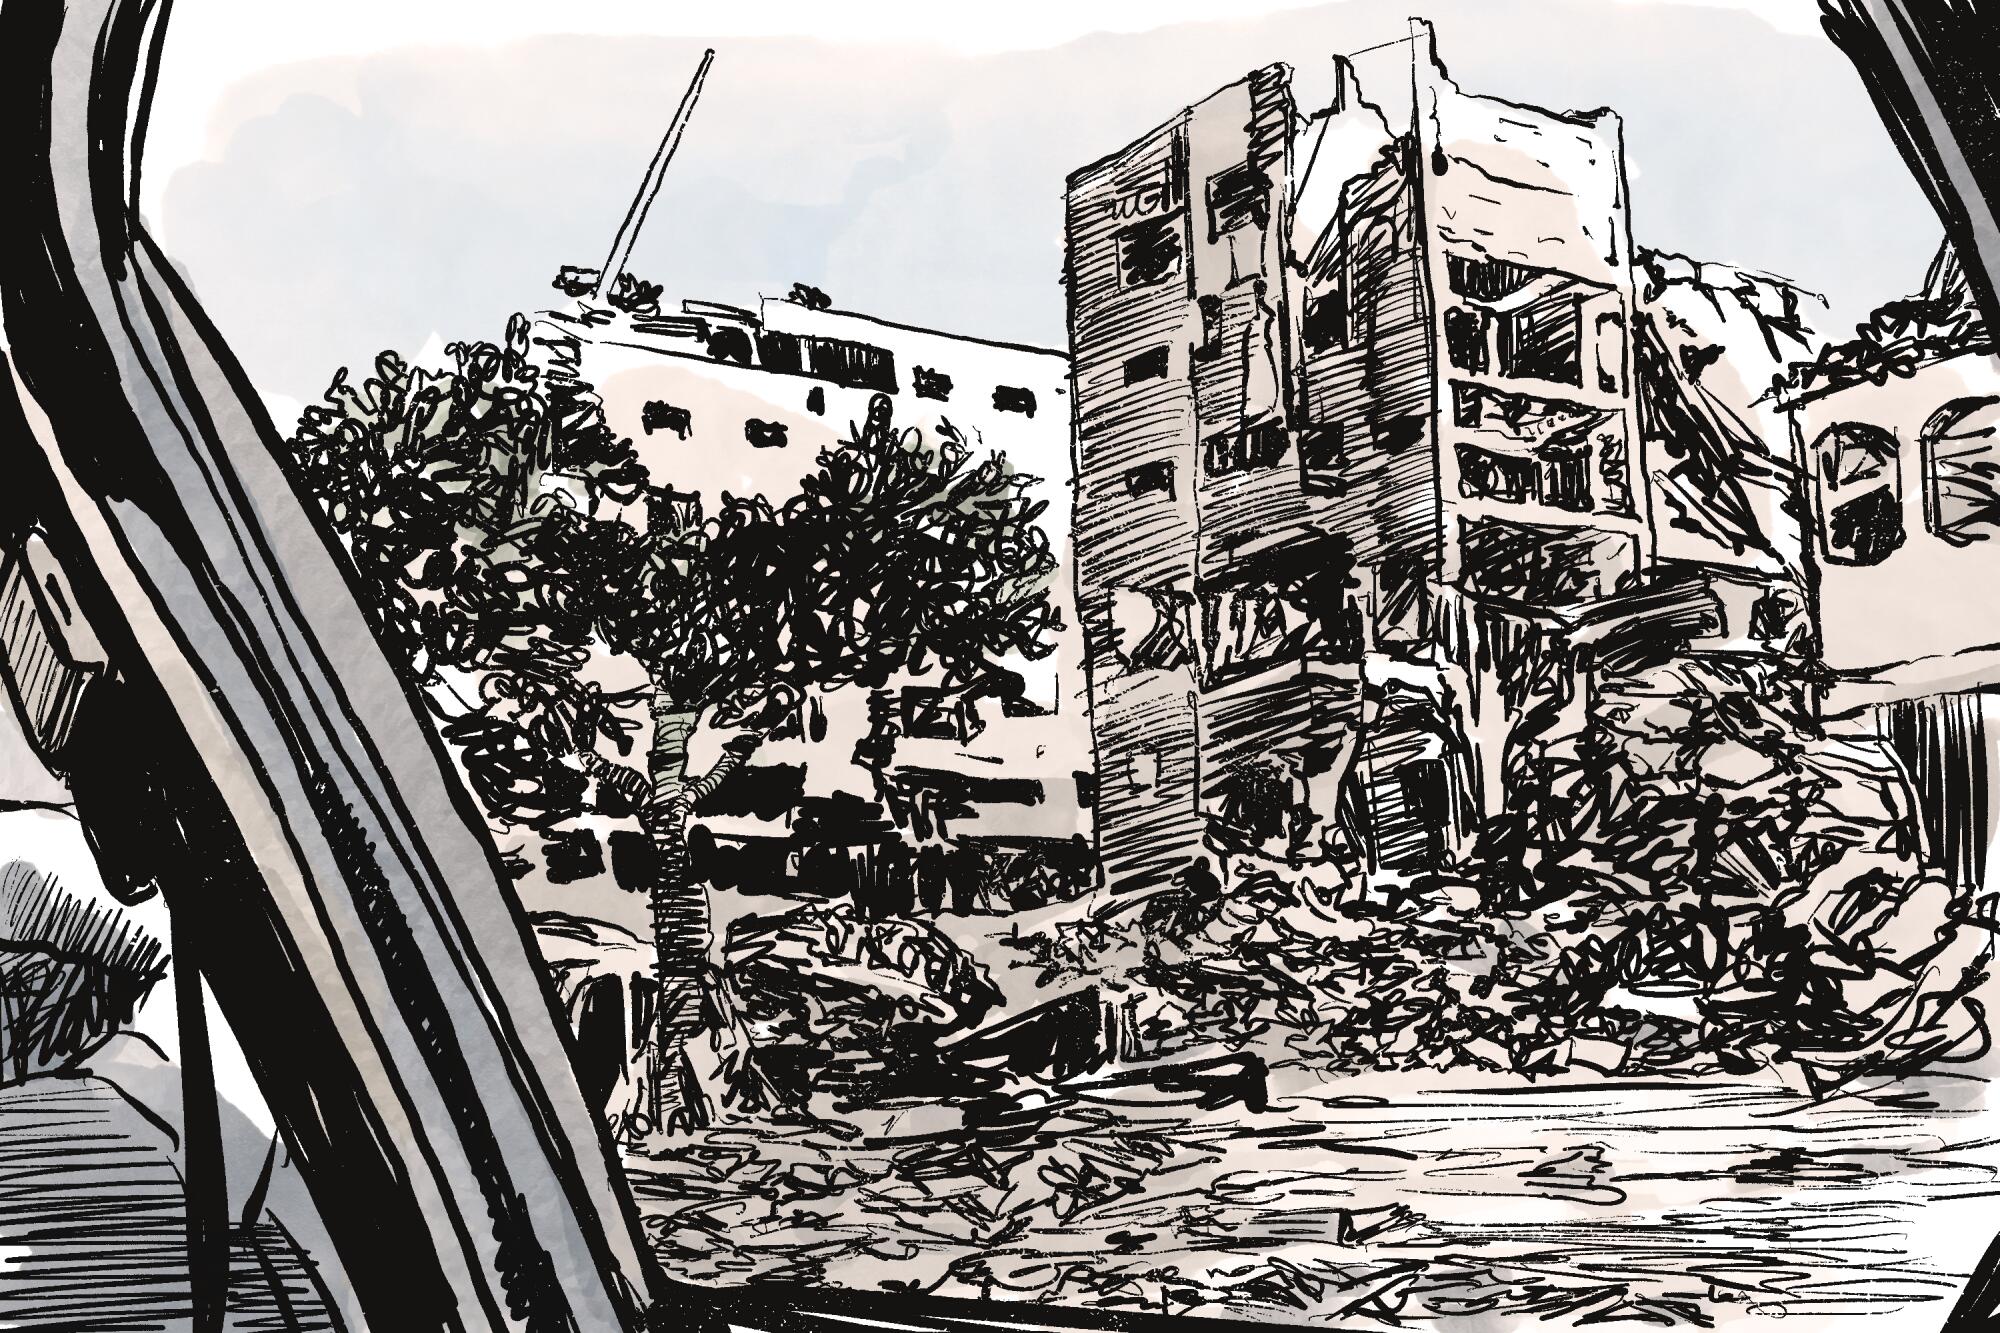 An illustration of destroyed buildings in Gaza seen through a car window.